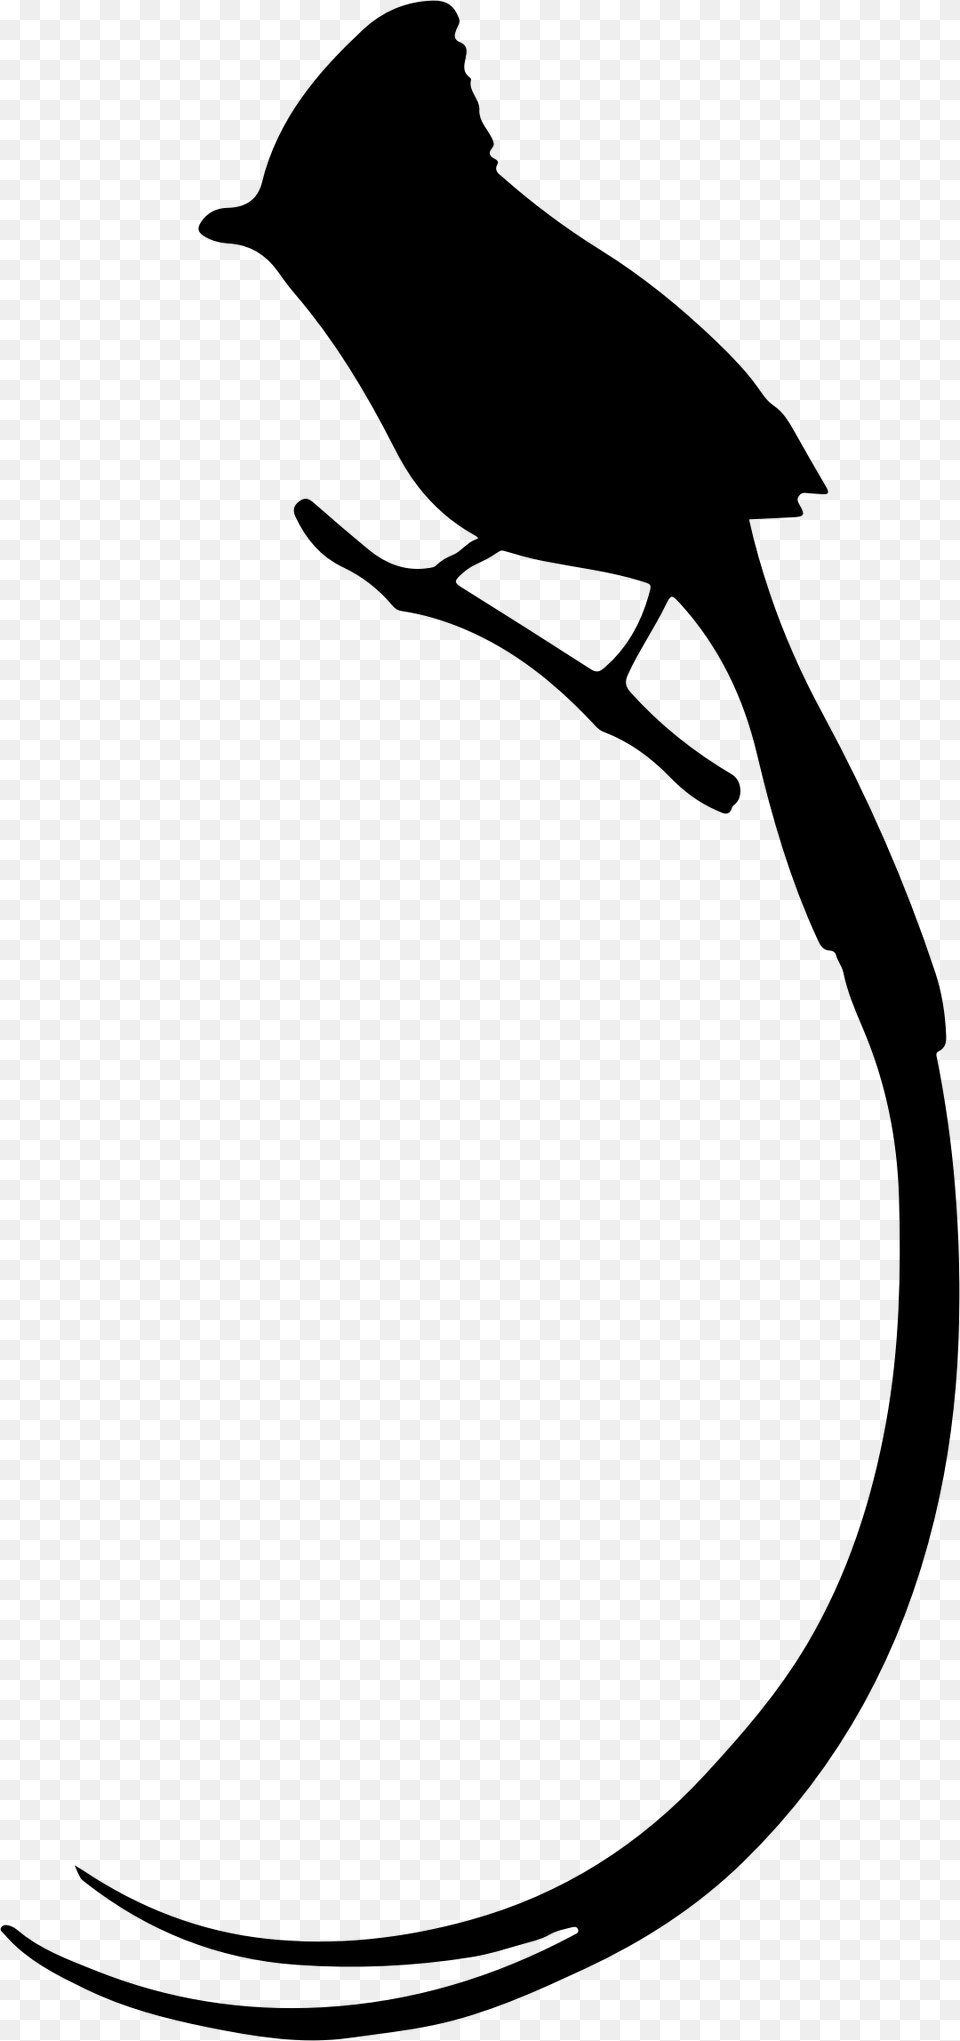 Bird Silhouette Animal Paradise Flycatcher, Gray Free Png Download